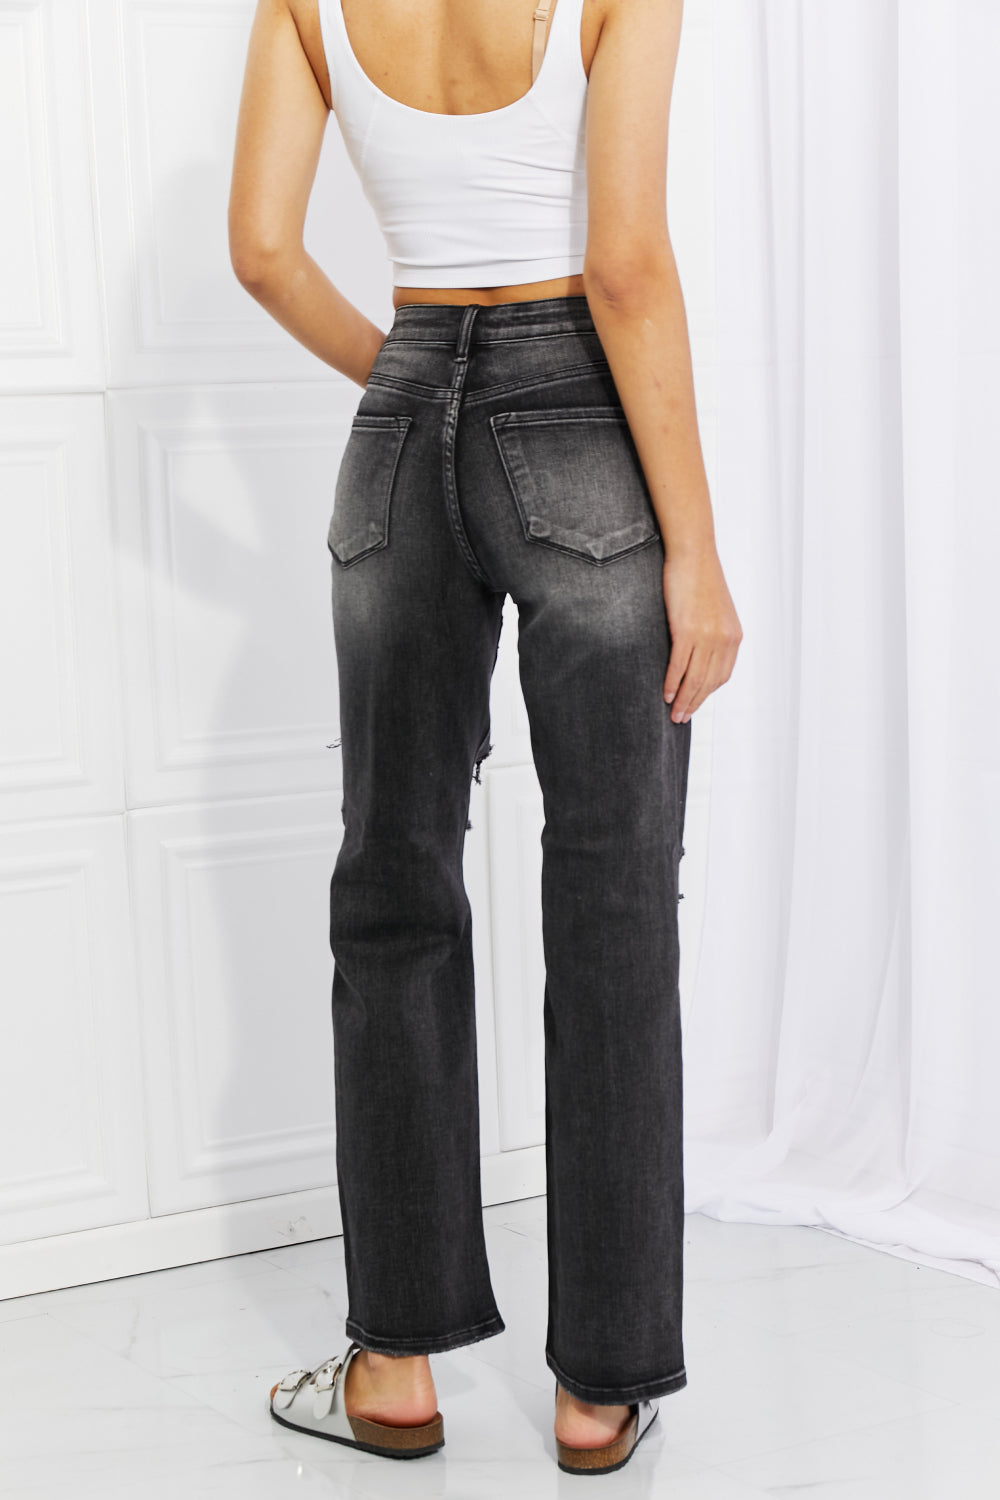 Loose Fit Distressed RISEN Lois Full Size Jeans